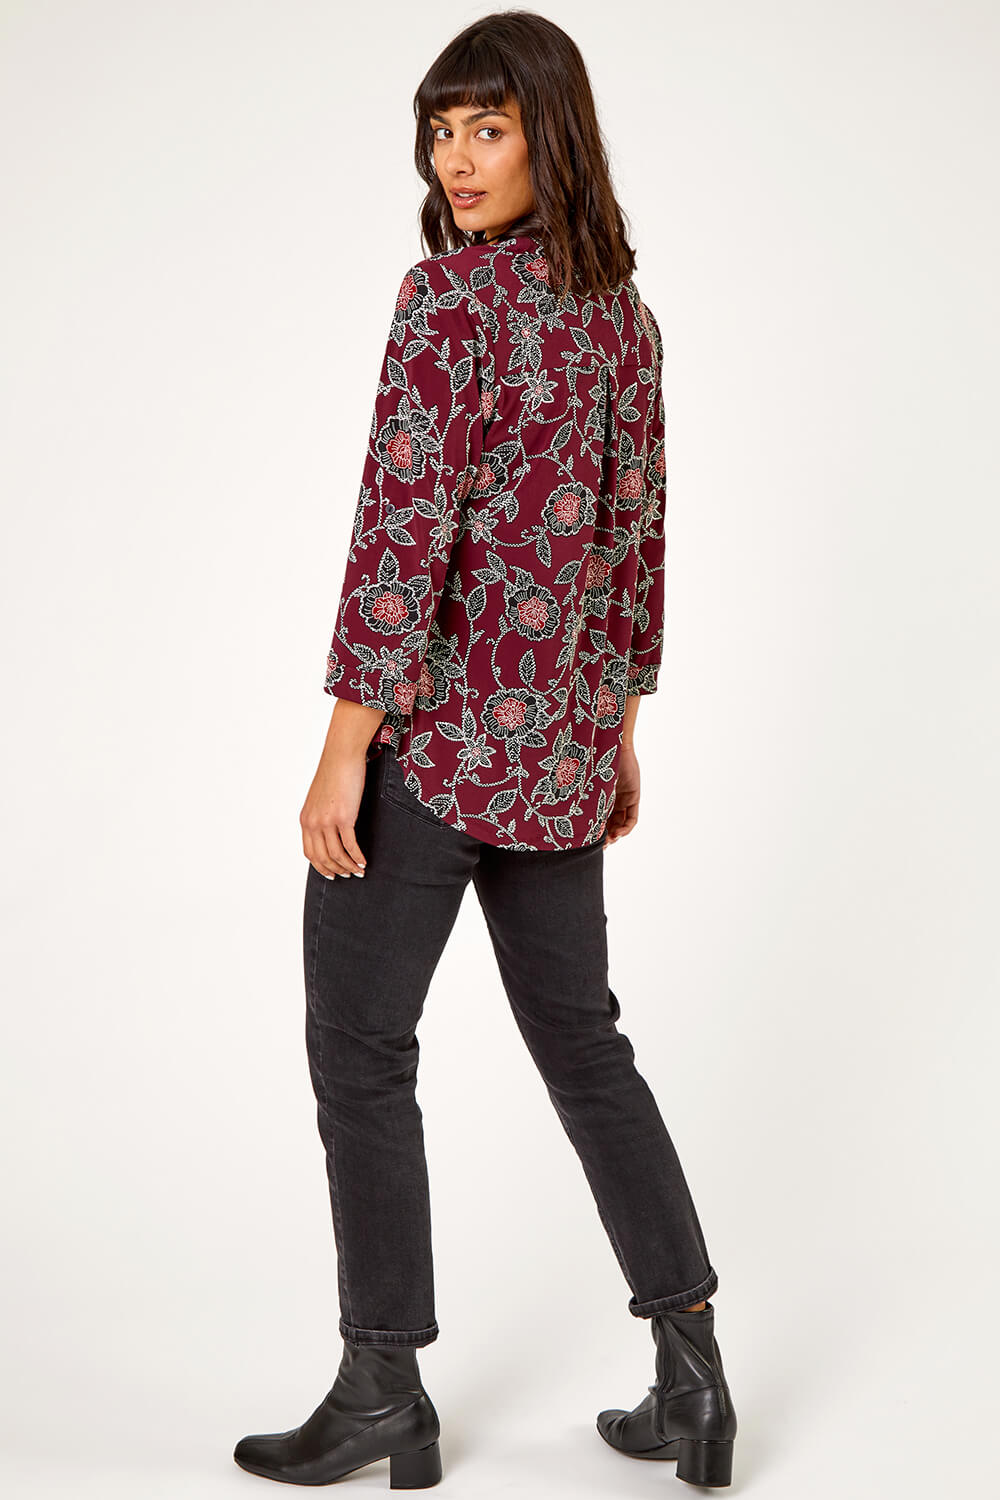 Wine Textured Floral Print Stretch Shirt , Image 2 of 5